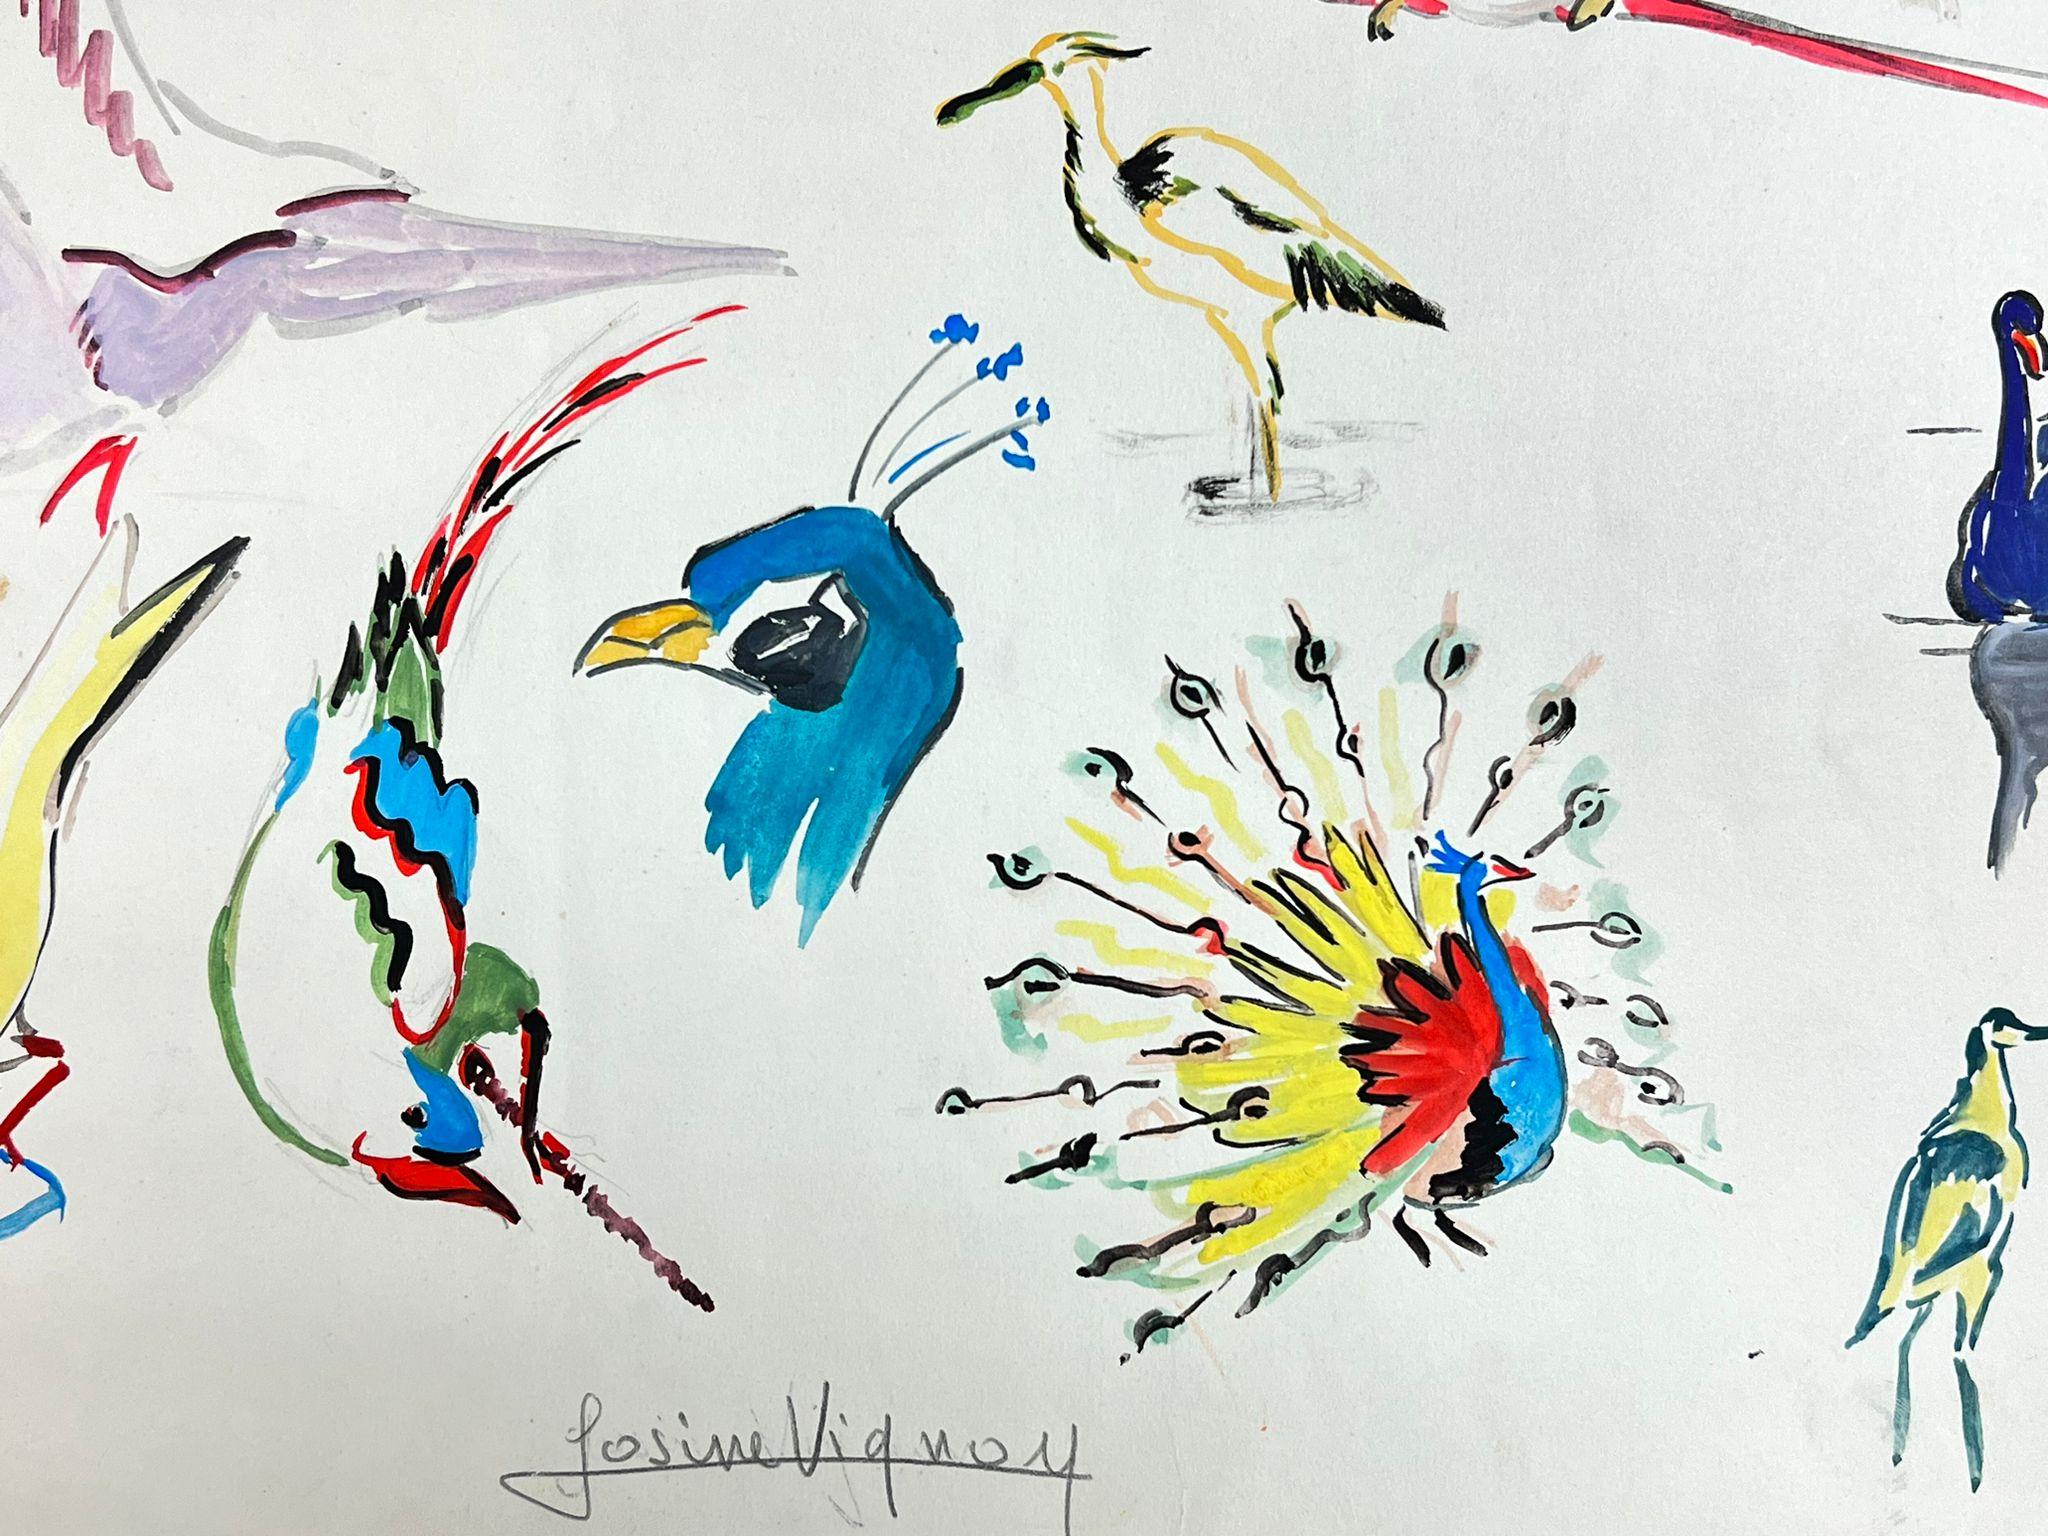 Bird Sketches
by Josine Vignon (French 1922-2022) 
signed
pastel/watercolor on paper, unframed
painting: 13 x 20 inches
good condition
provenance: from the artists estate, France

Josine Vignon (1922-2022) was a French artist living on the Rue